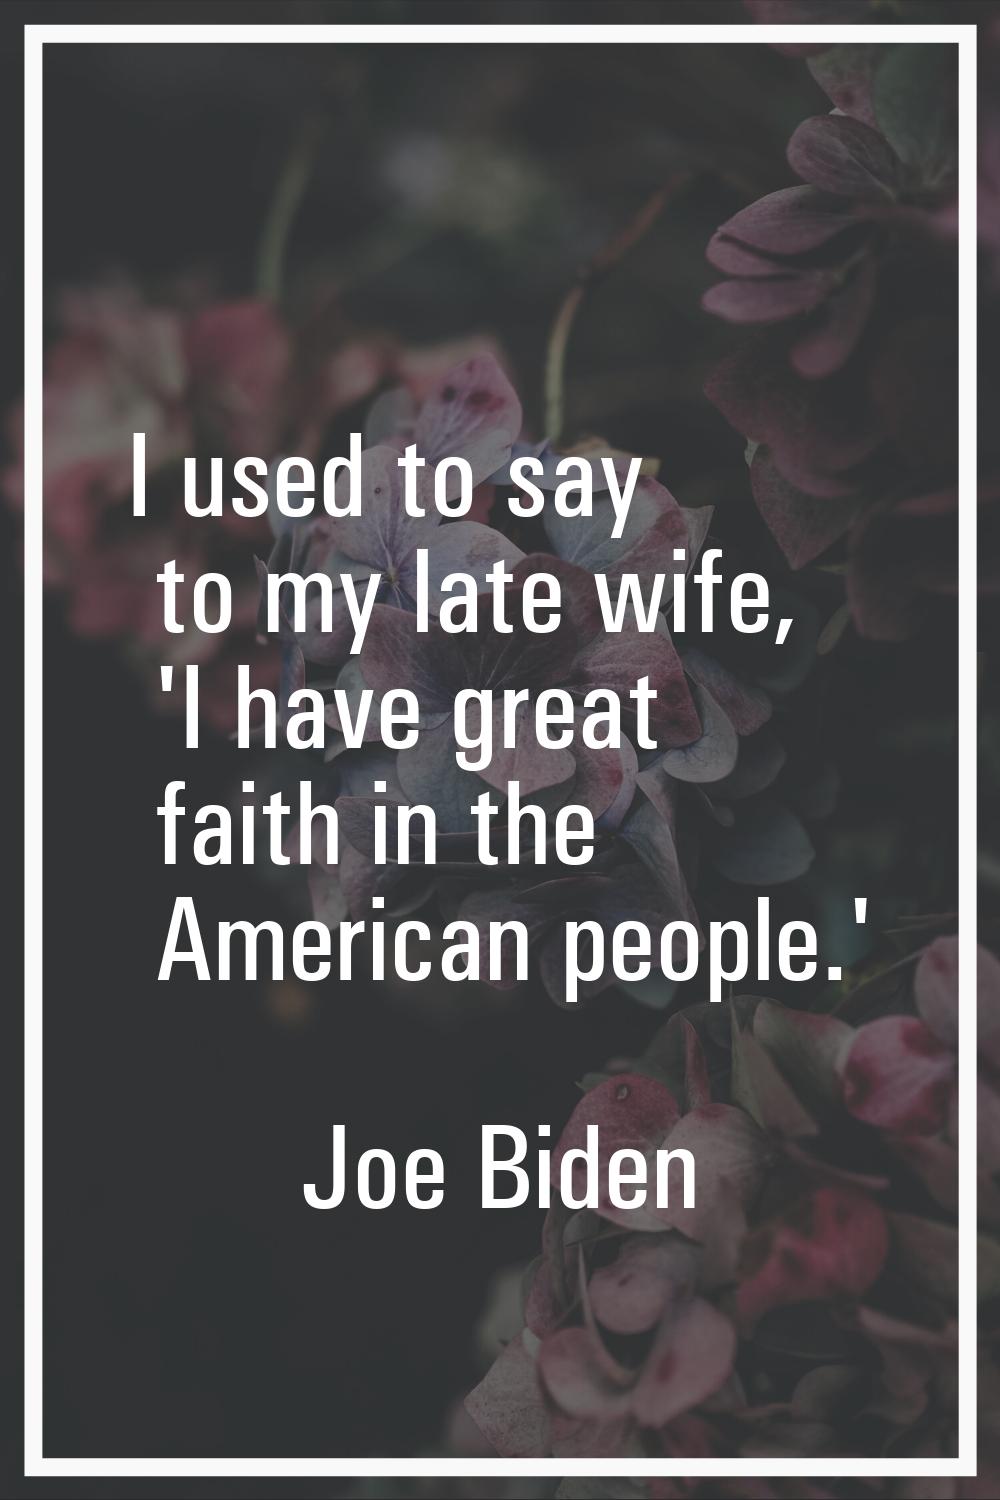 I used to say to my late wife, 'I have great faith in the American people.'